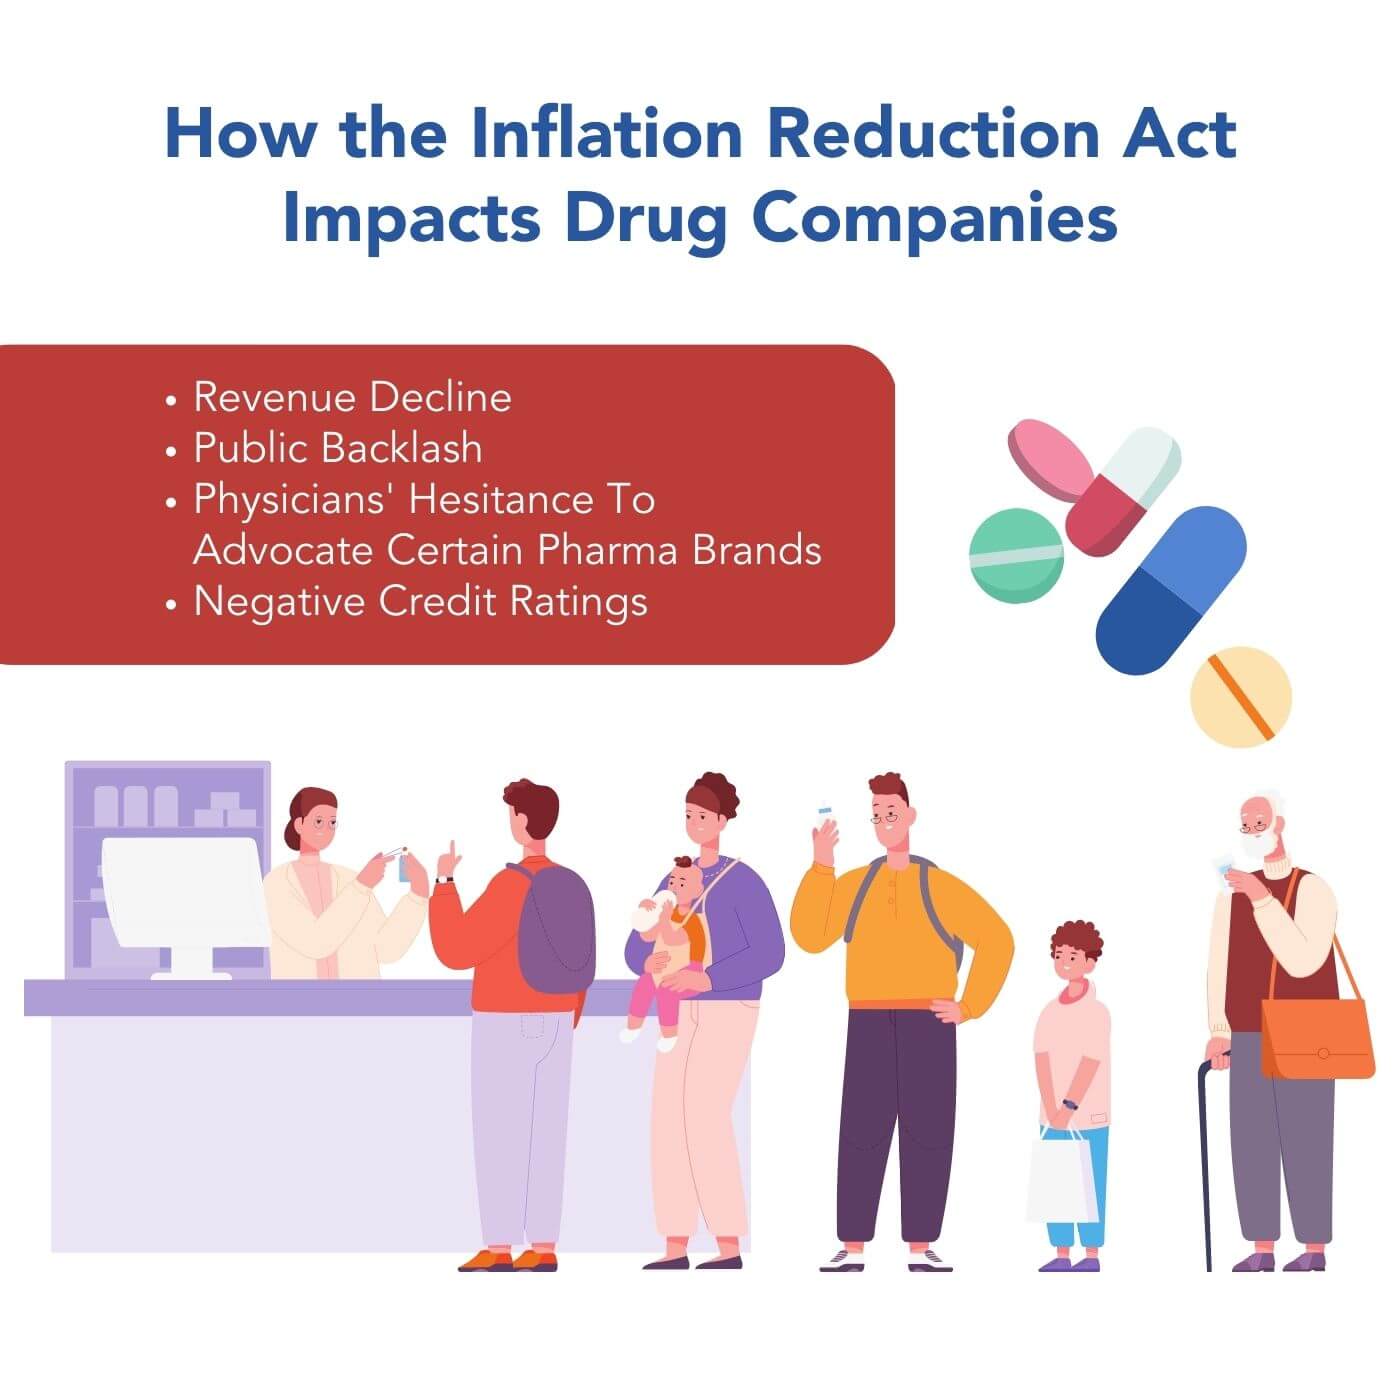 How the Inflation Reduction Act Impacts Drug Companies